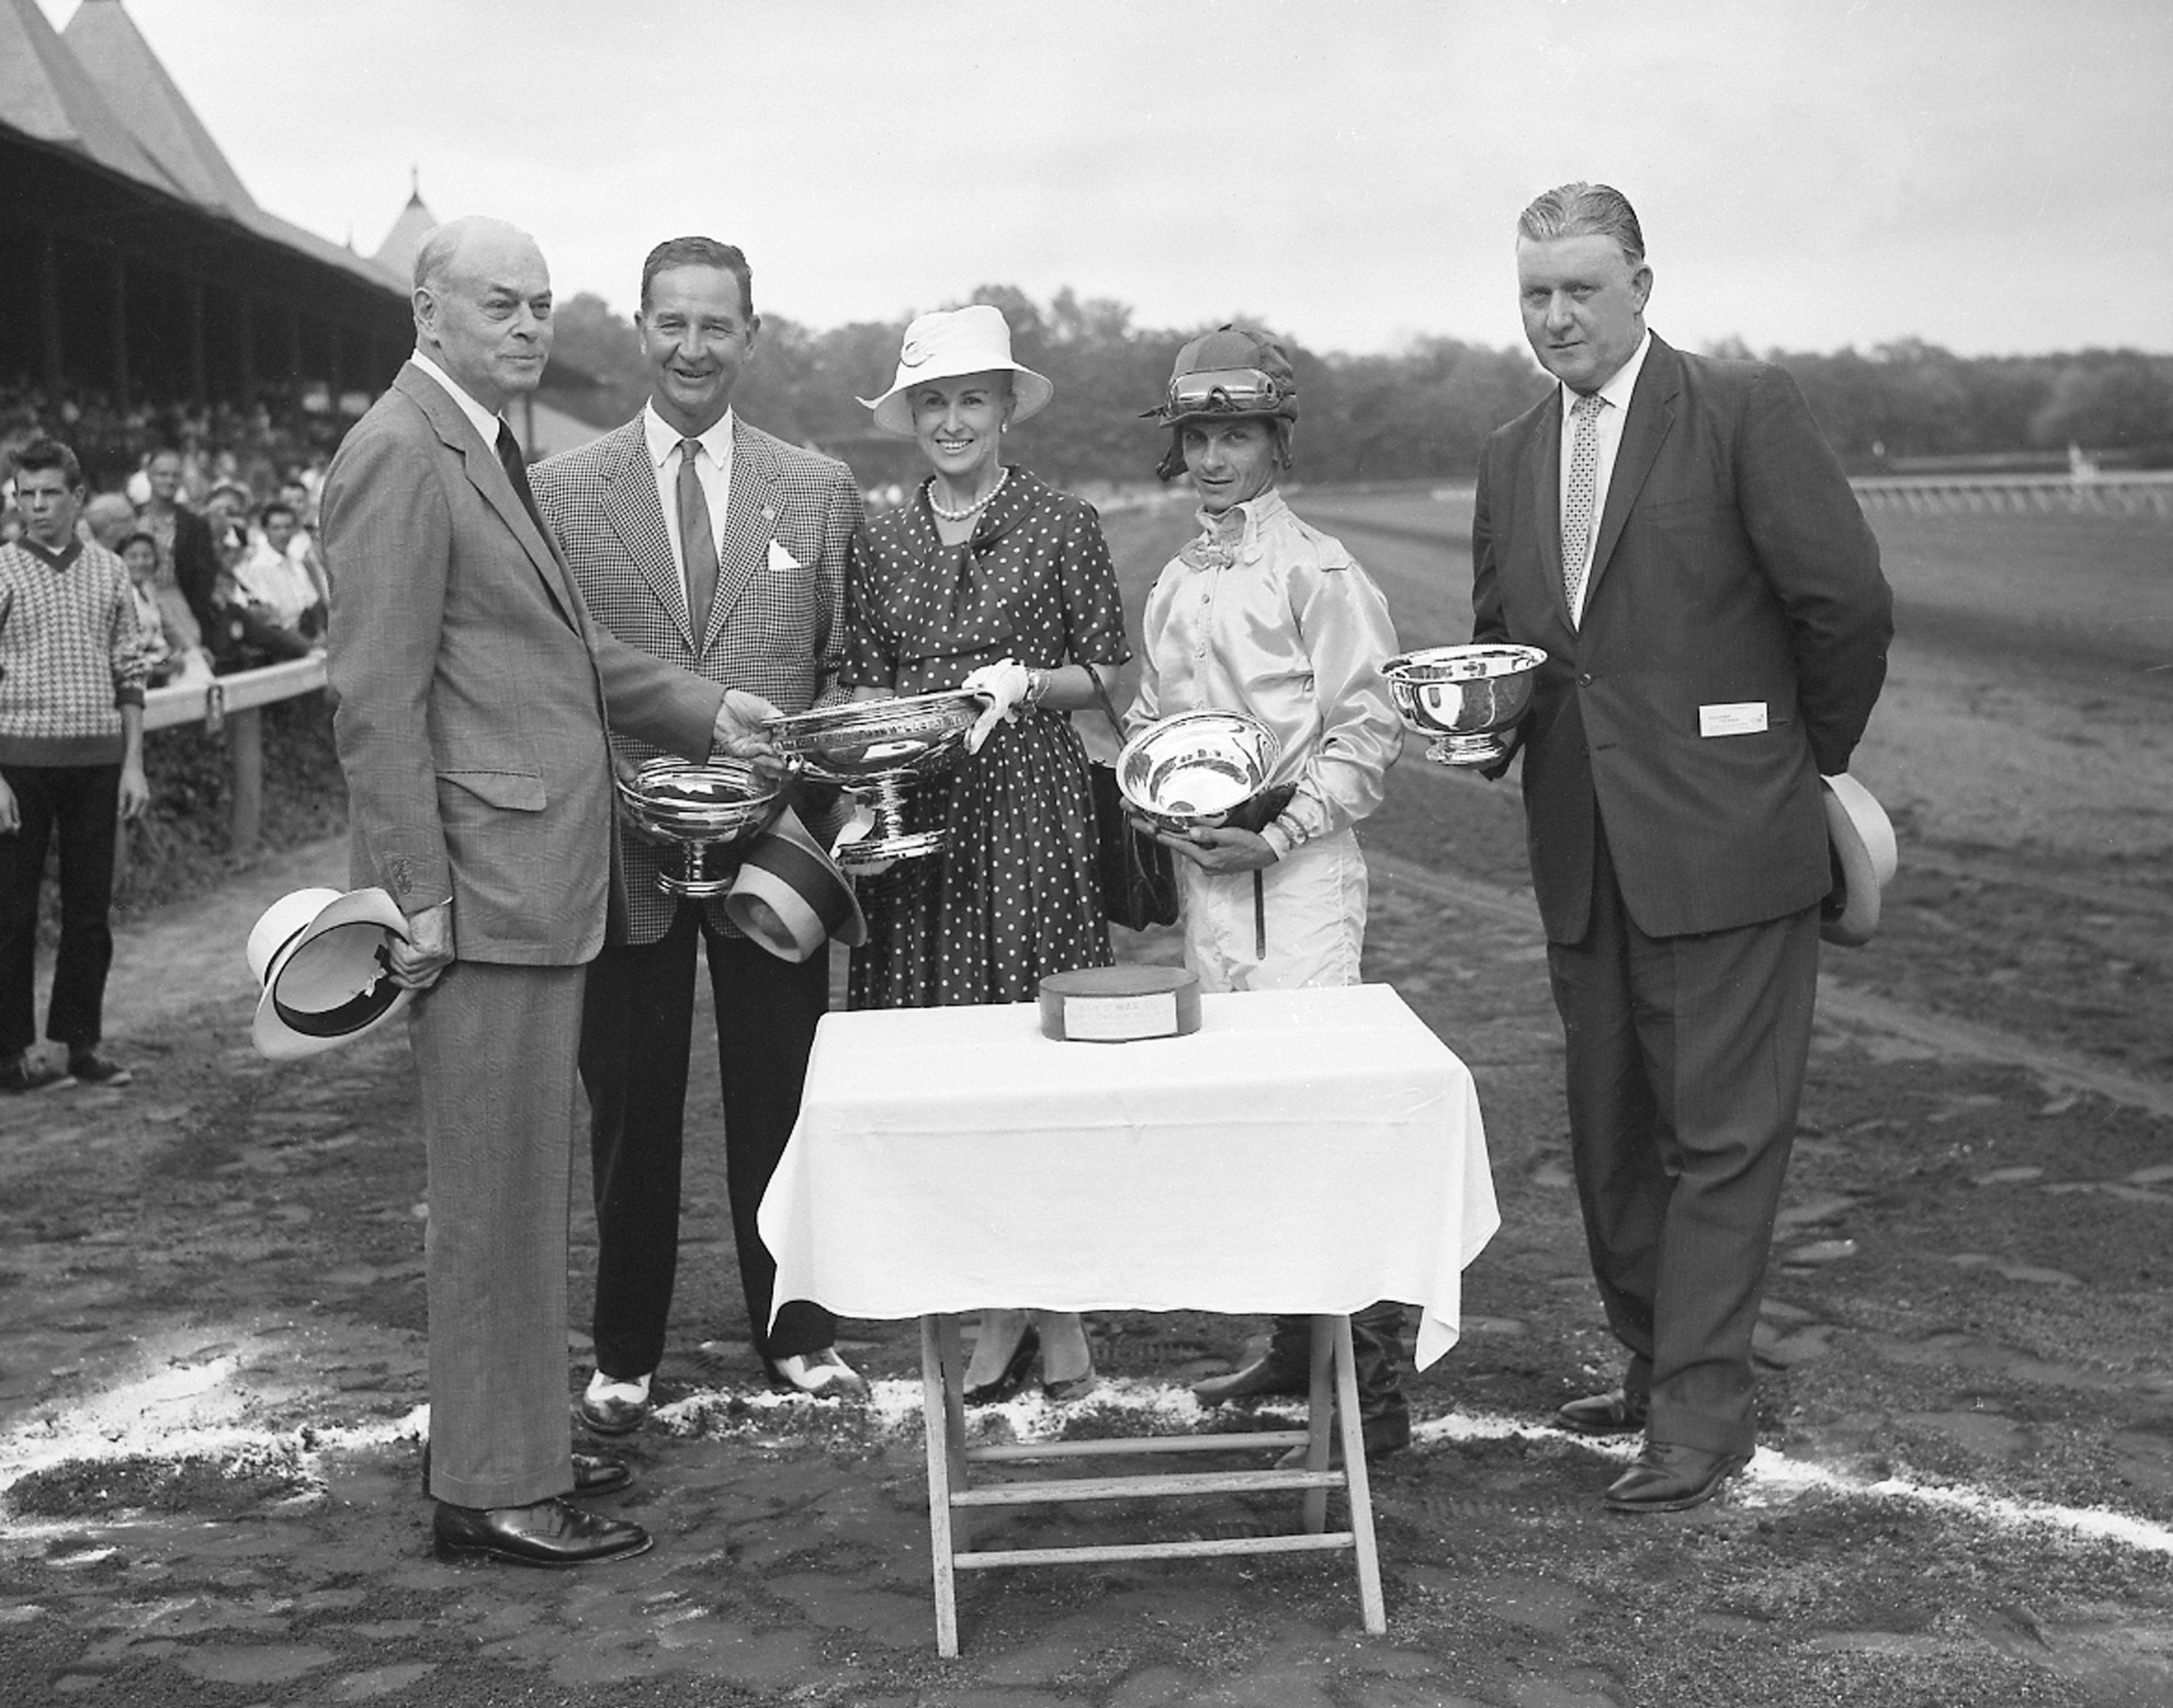 Walter M. Jeffords, Sr. presents the winning connections of Tompion - owners Mr. and Mrs. C. V. Whitney, jockey Bill Hartack, and trainer JJ Greely -  with the 1960 Travers Stakes trophy at Saratoga (Keeneland Library Morgan Collection)